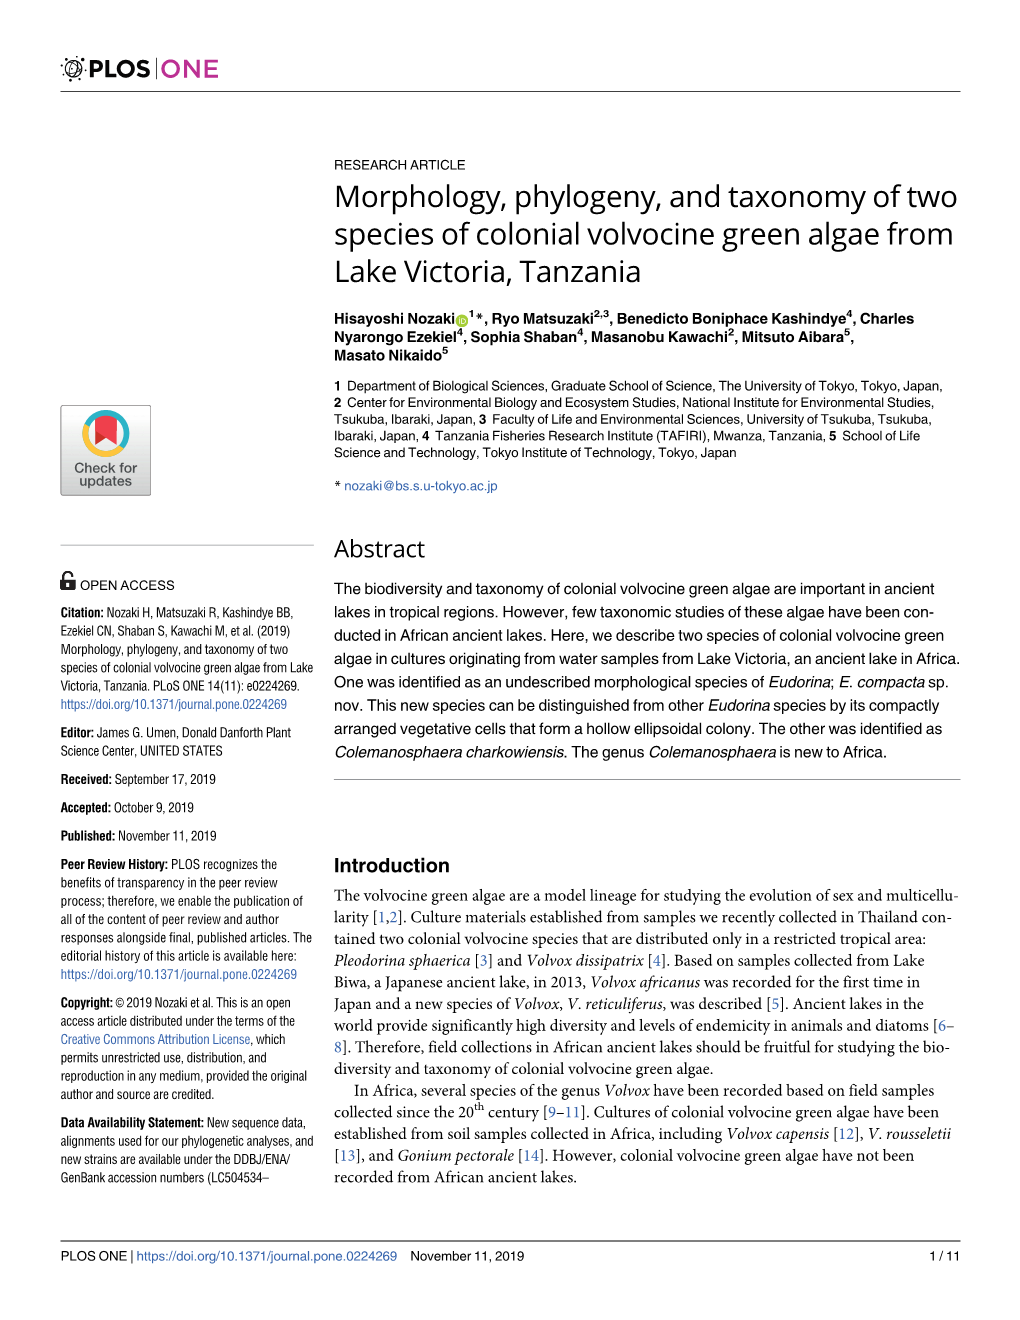 Morphology, Phylogeny, and Taxonomy of Two Species of Colonial Volvocine Green Algae from Lake Victoria, Tanzania